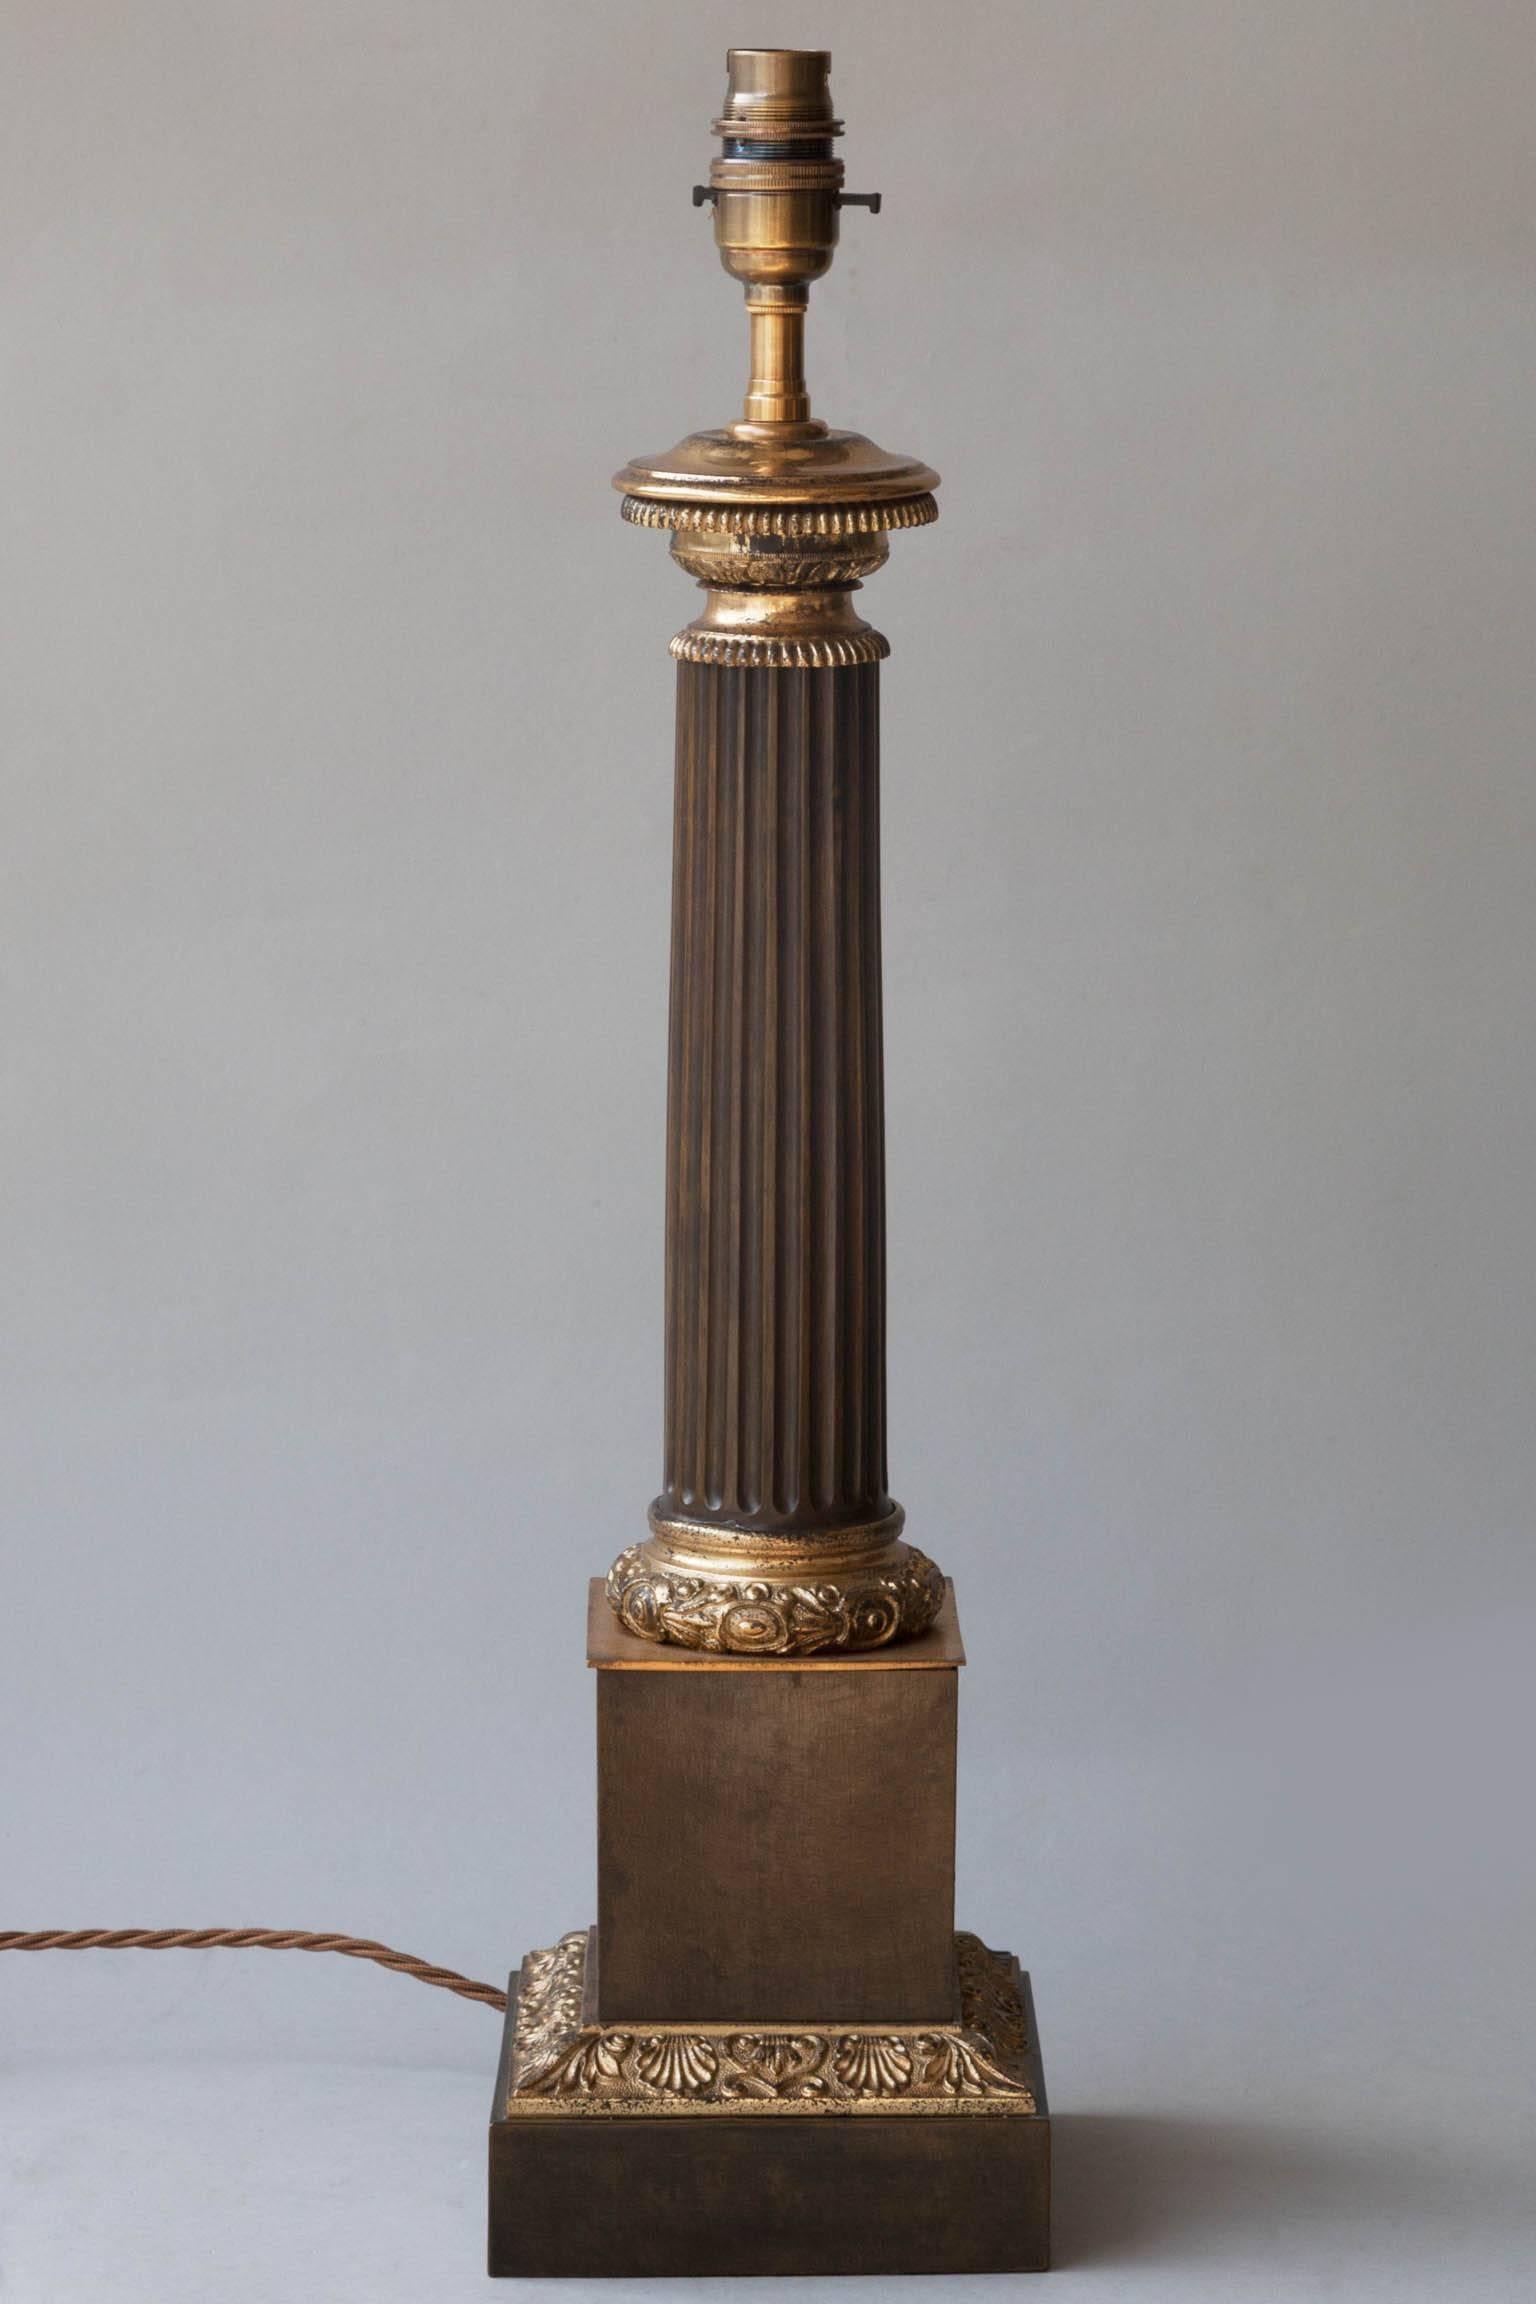 Gilt bronze mounts with foliat decoration in relief. Central fluted column supported on a plinth base, 
France, circa 1830. Currently electrified for the UK. Shown with a 18” silk shade available separately.